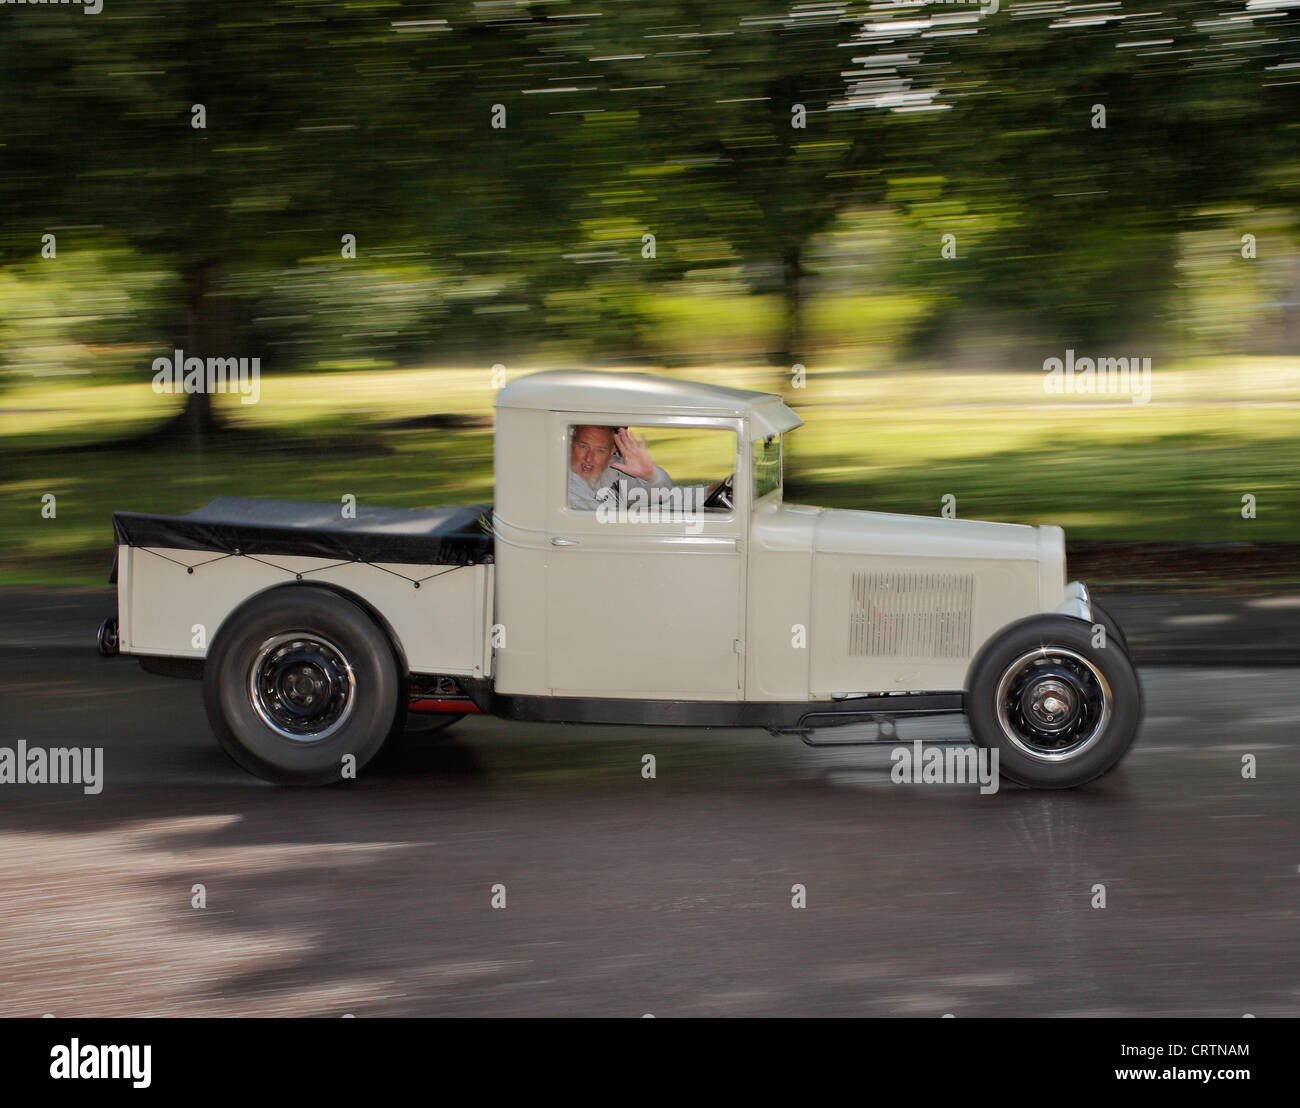 Hot rod traveling at speed. Stock Photo